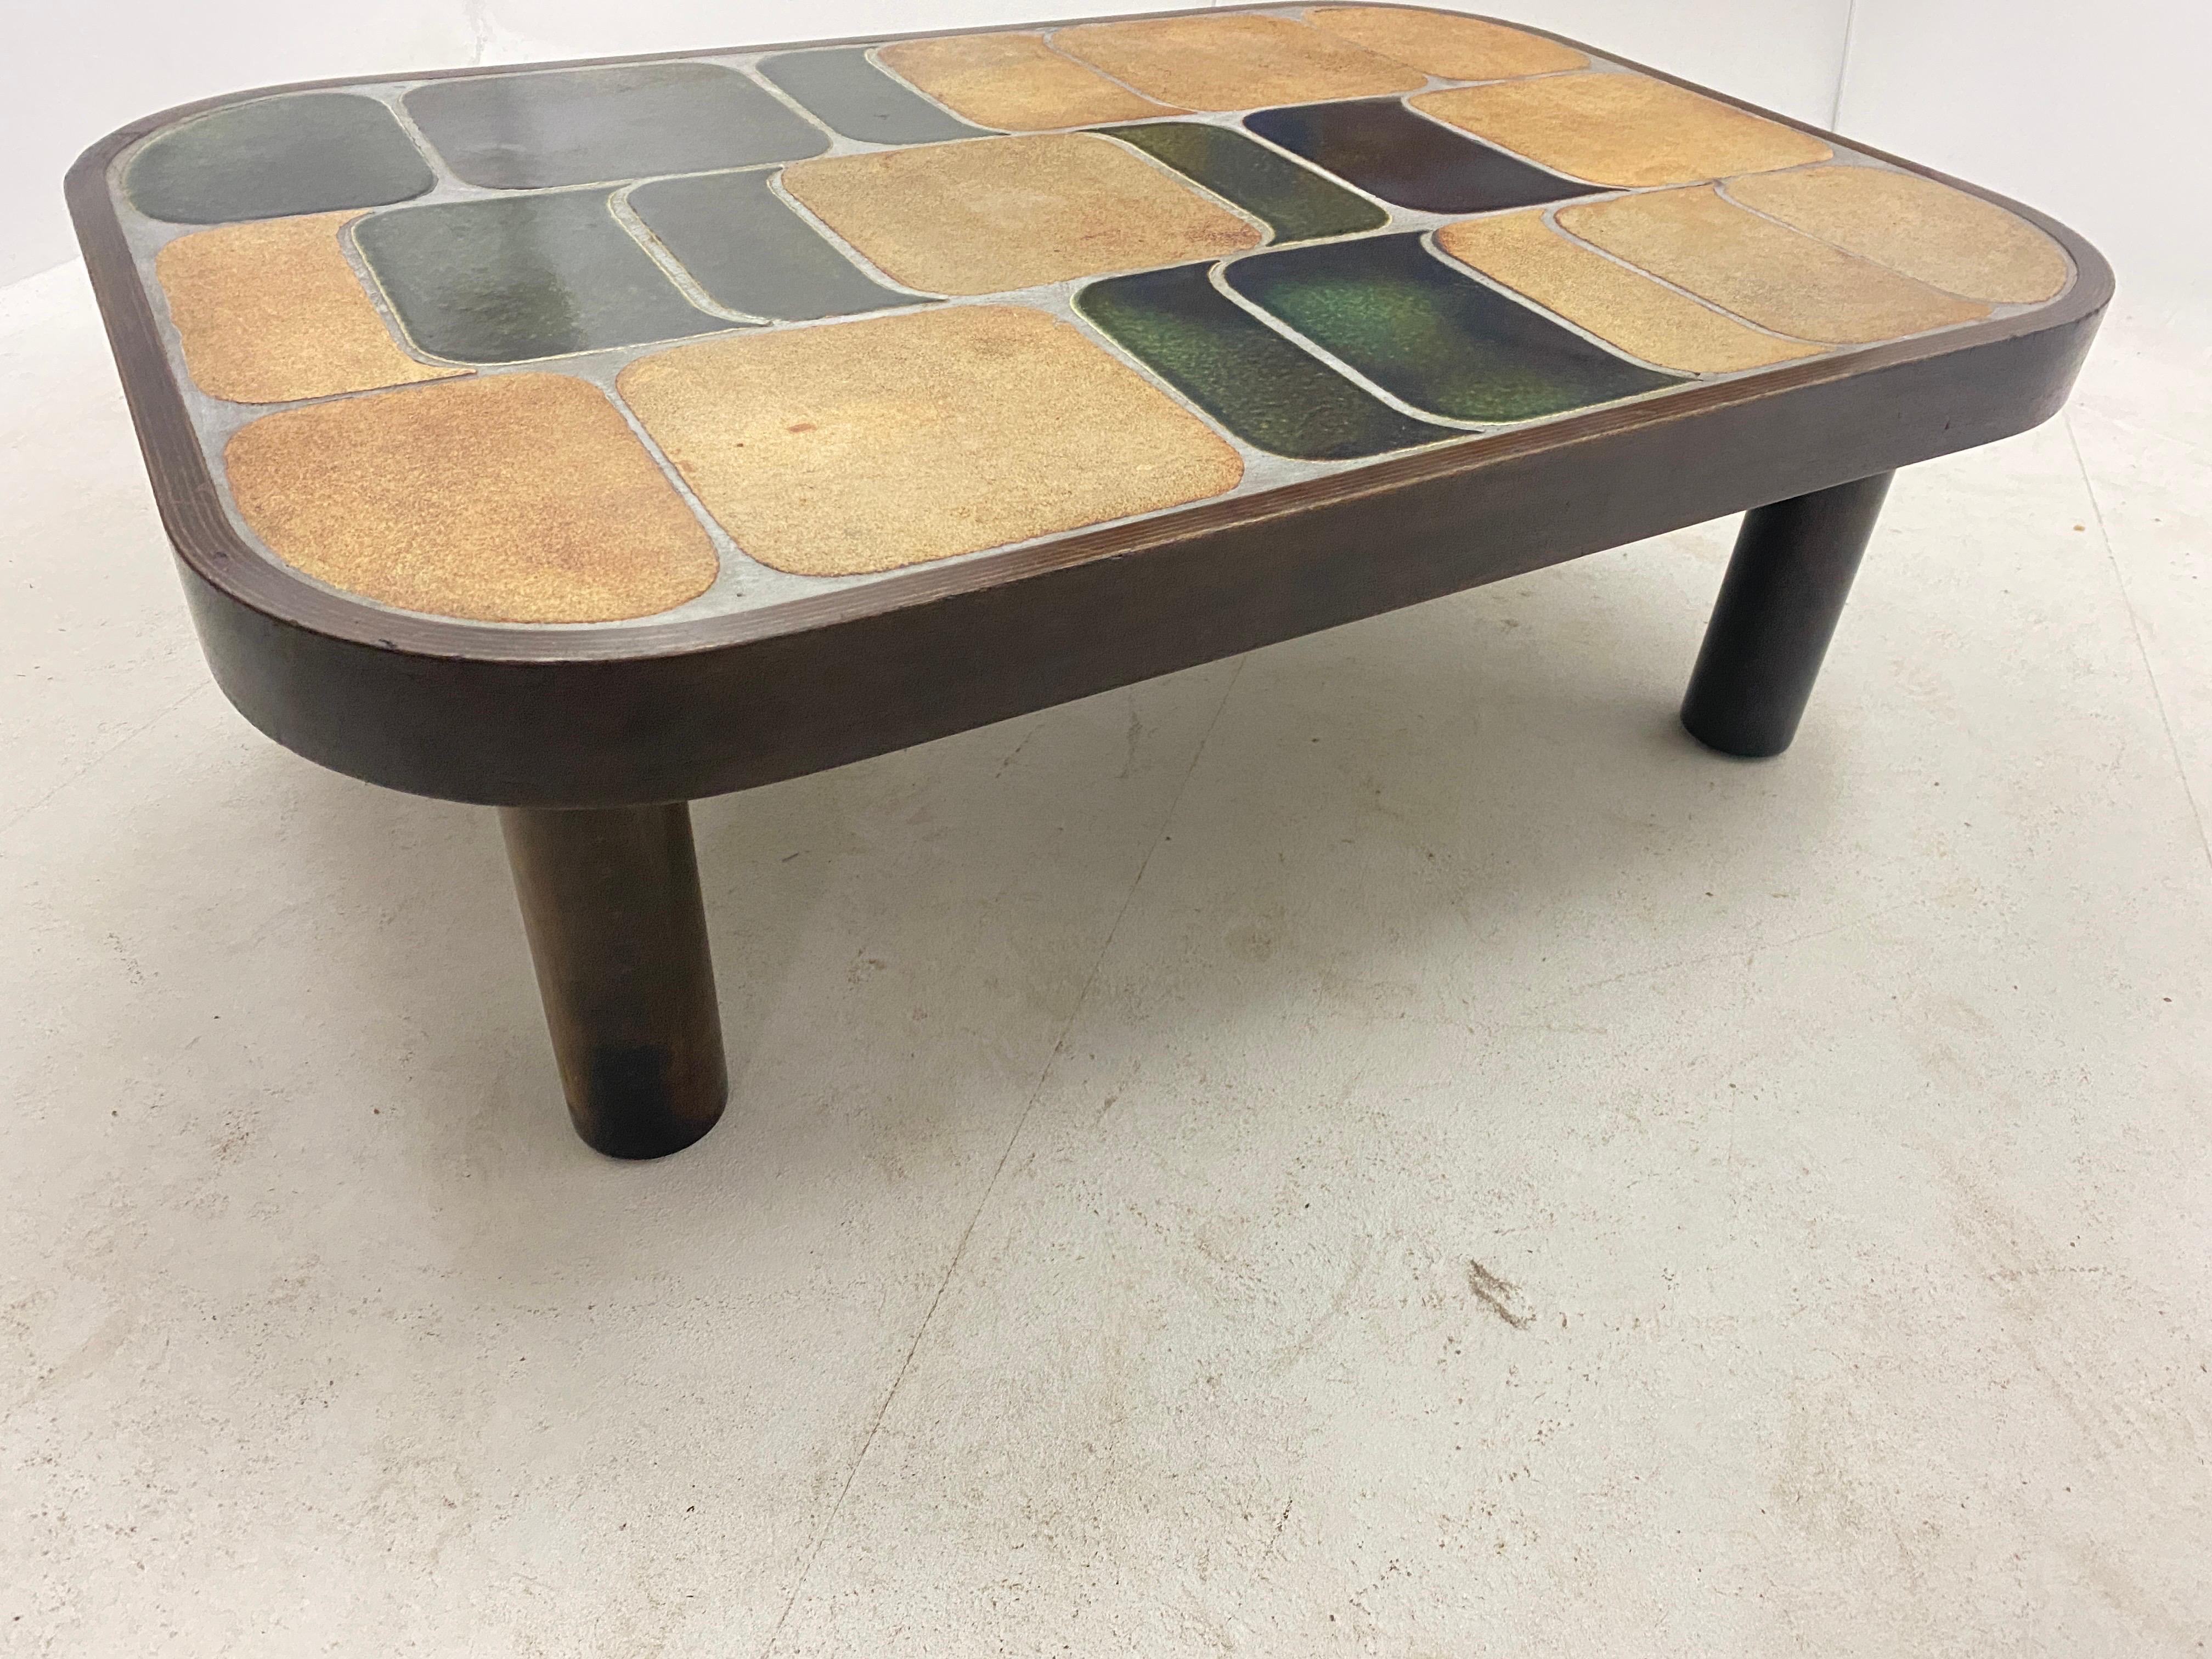 Roger Capron ‘Shogun’ Coffee Table in Ceramic France 1970 Brown and Green Color 1